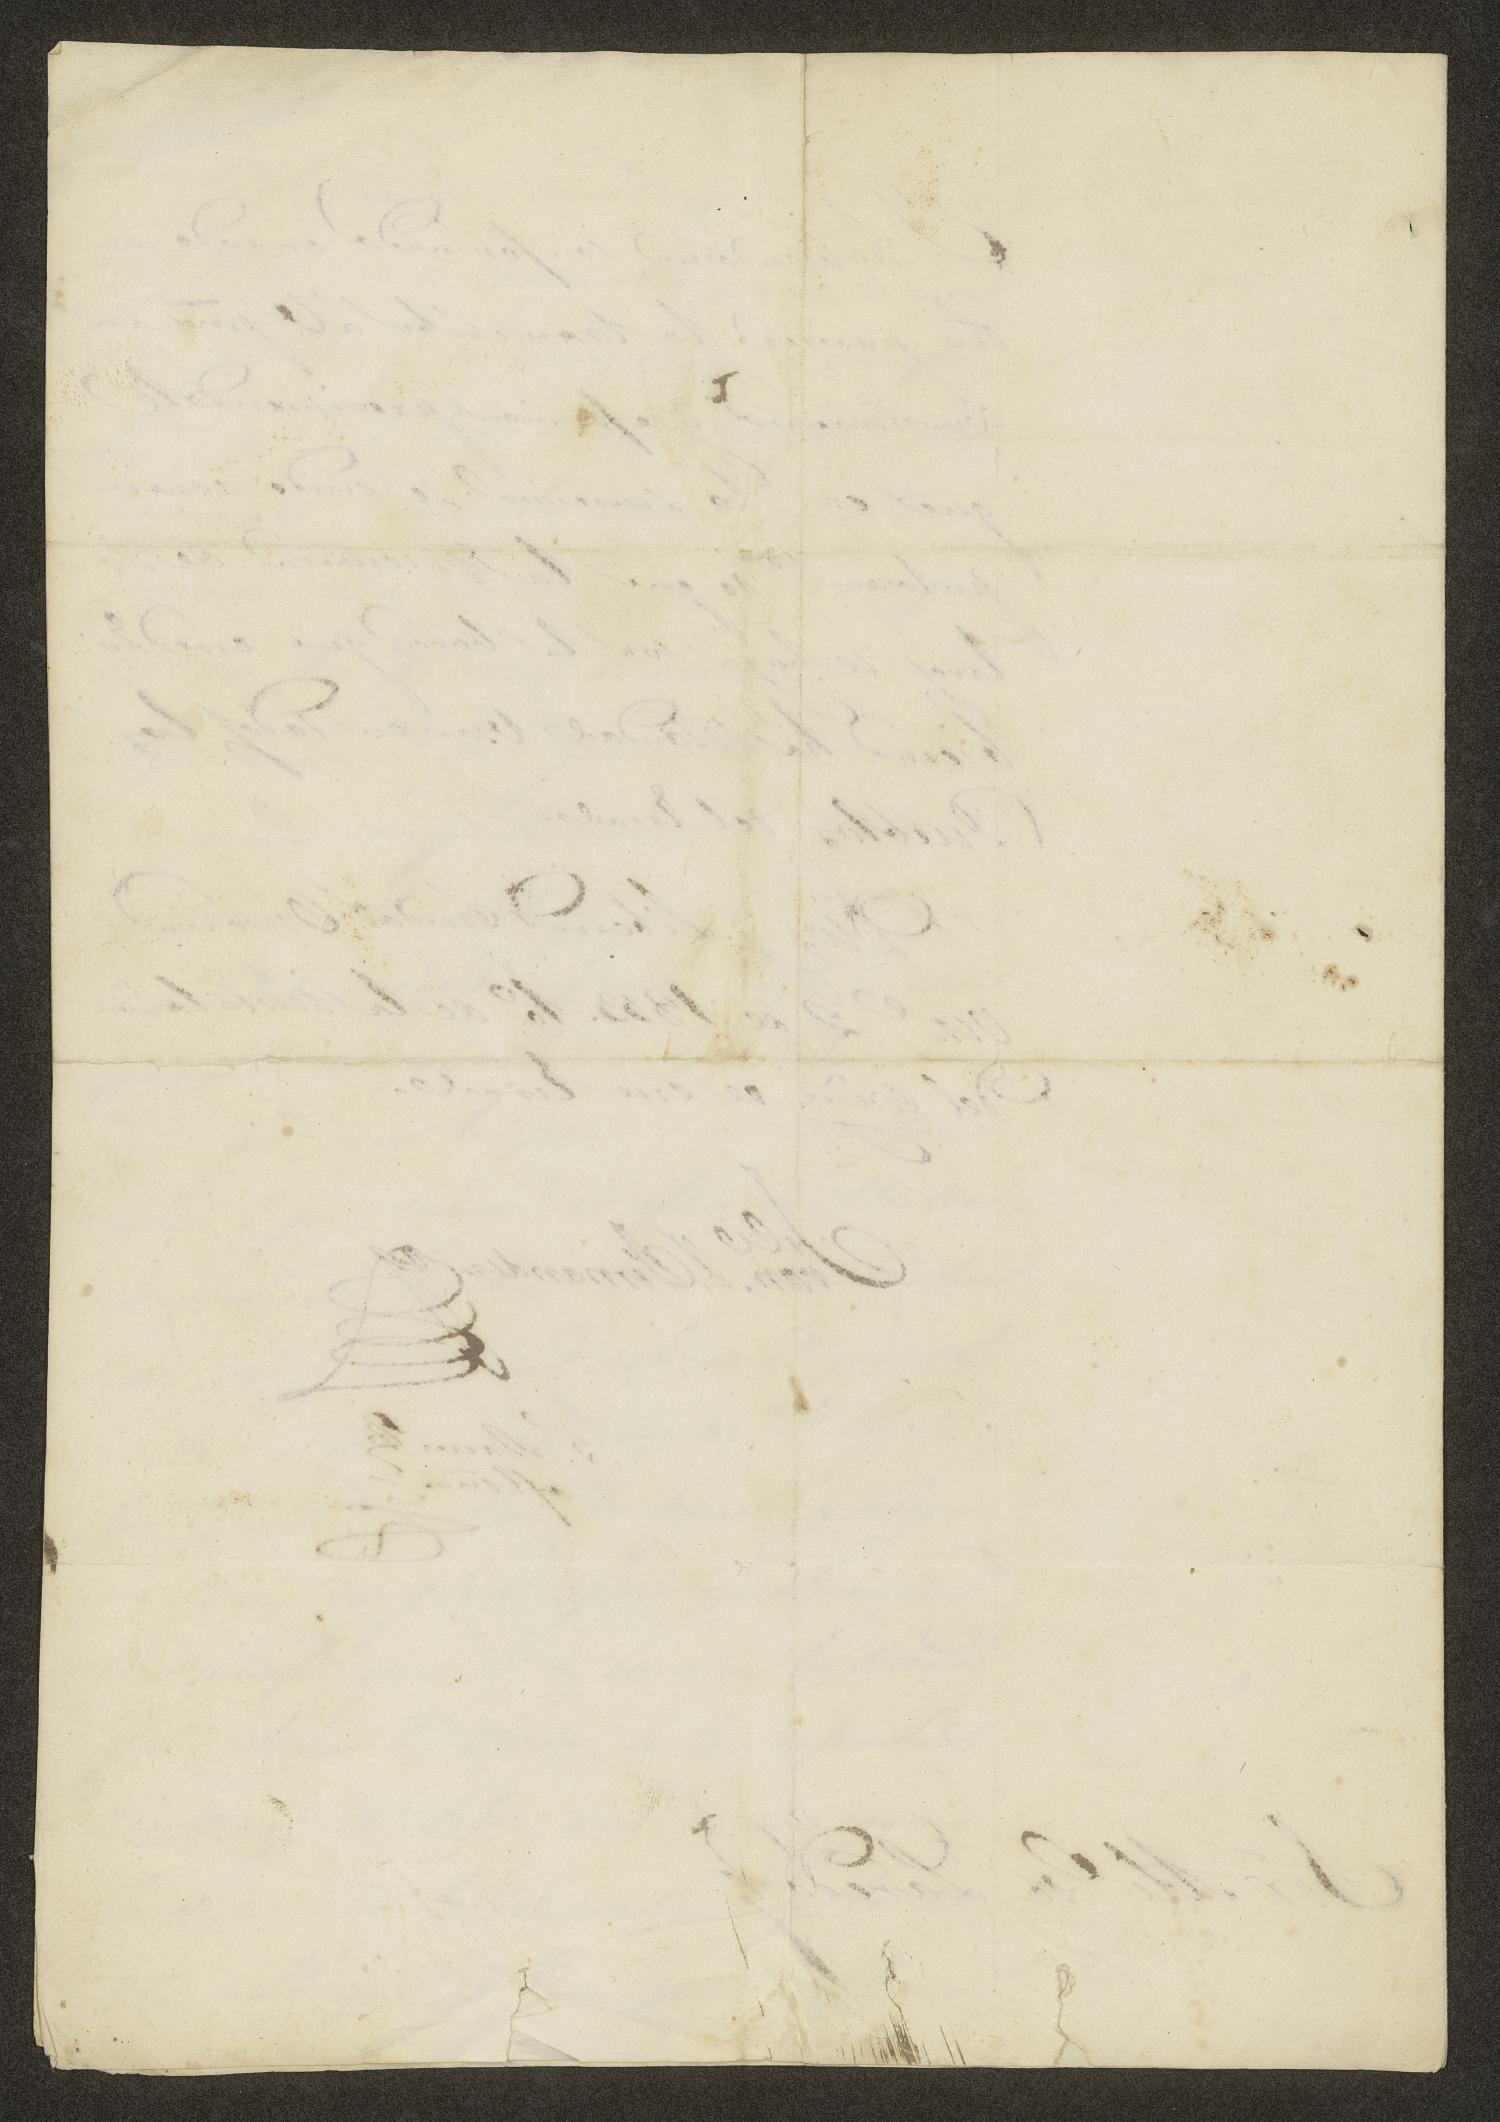 [Letter from the Governor of Tamaulipas to the Laredo Alcalde, October 2, 1833]
                                                
                                                    [Sequence #]: 4 of 4
                                                